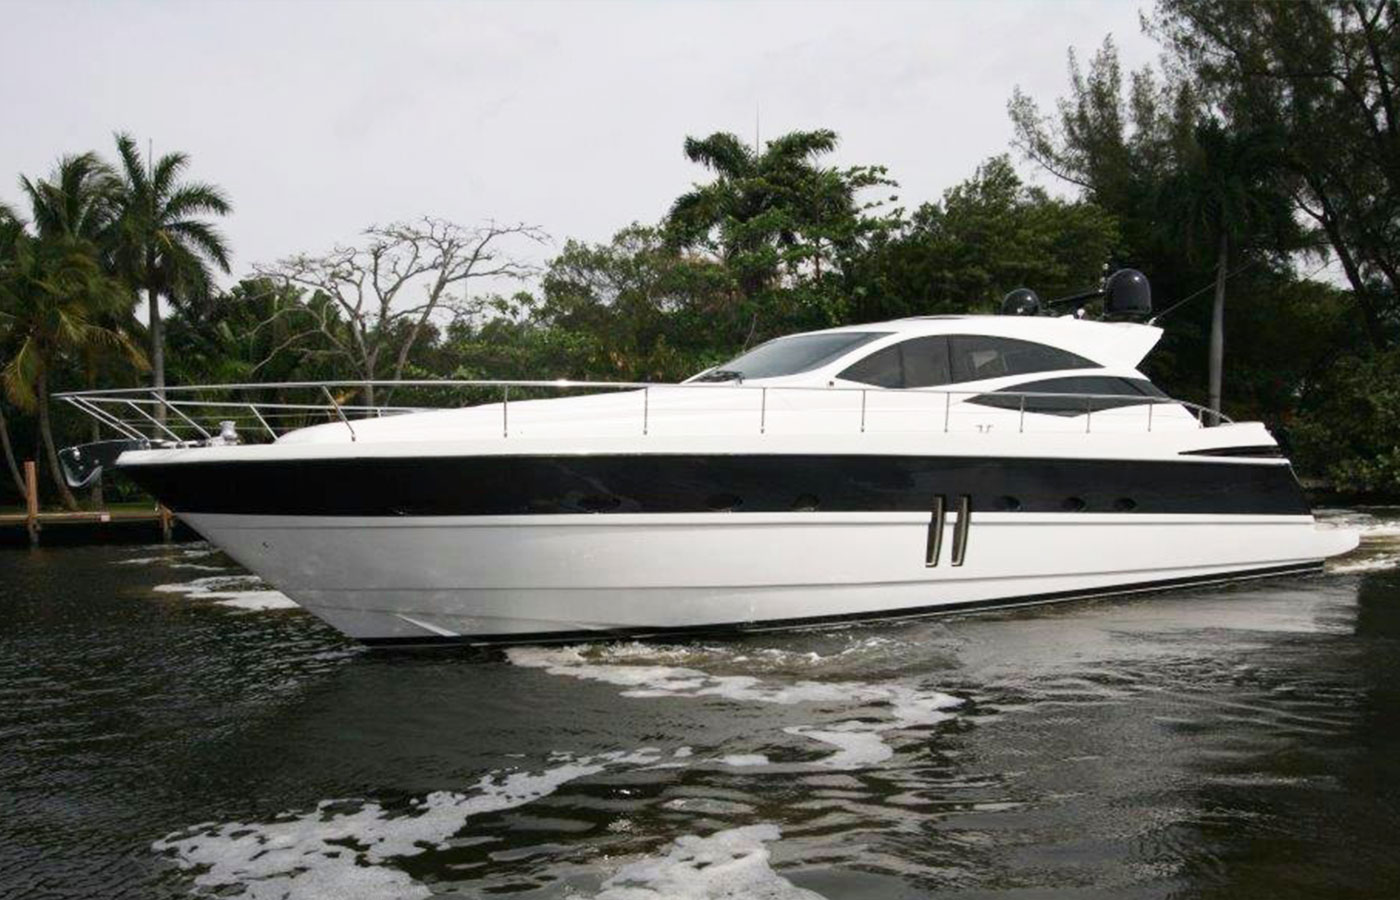 SOLD: 62′ Pershing 2006 By Yacht Broker Peter Quintal